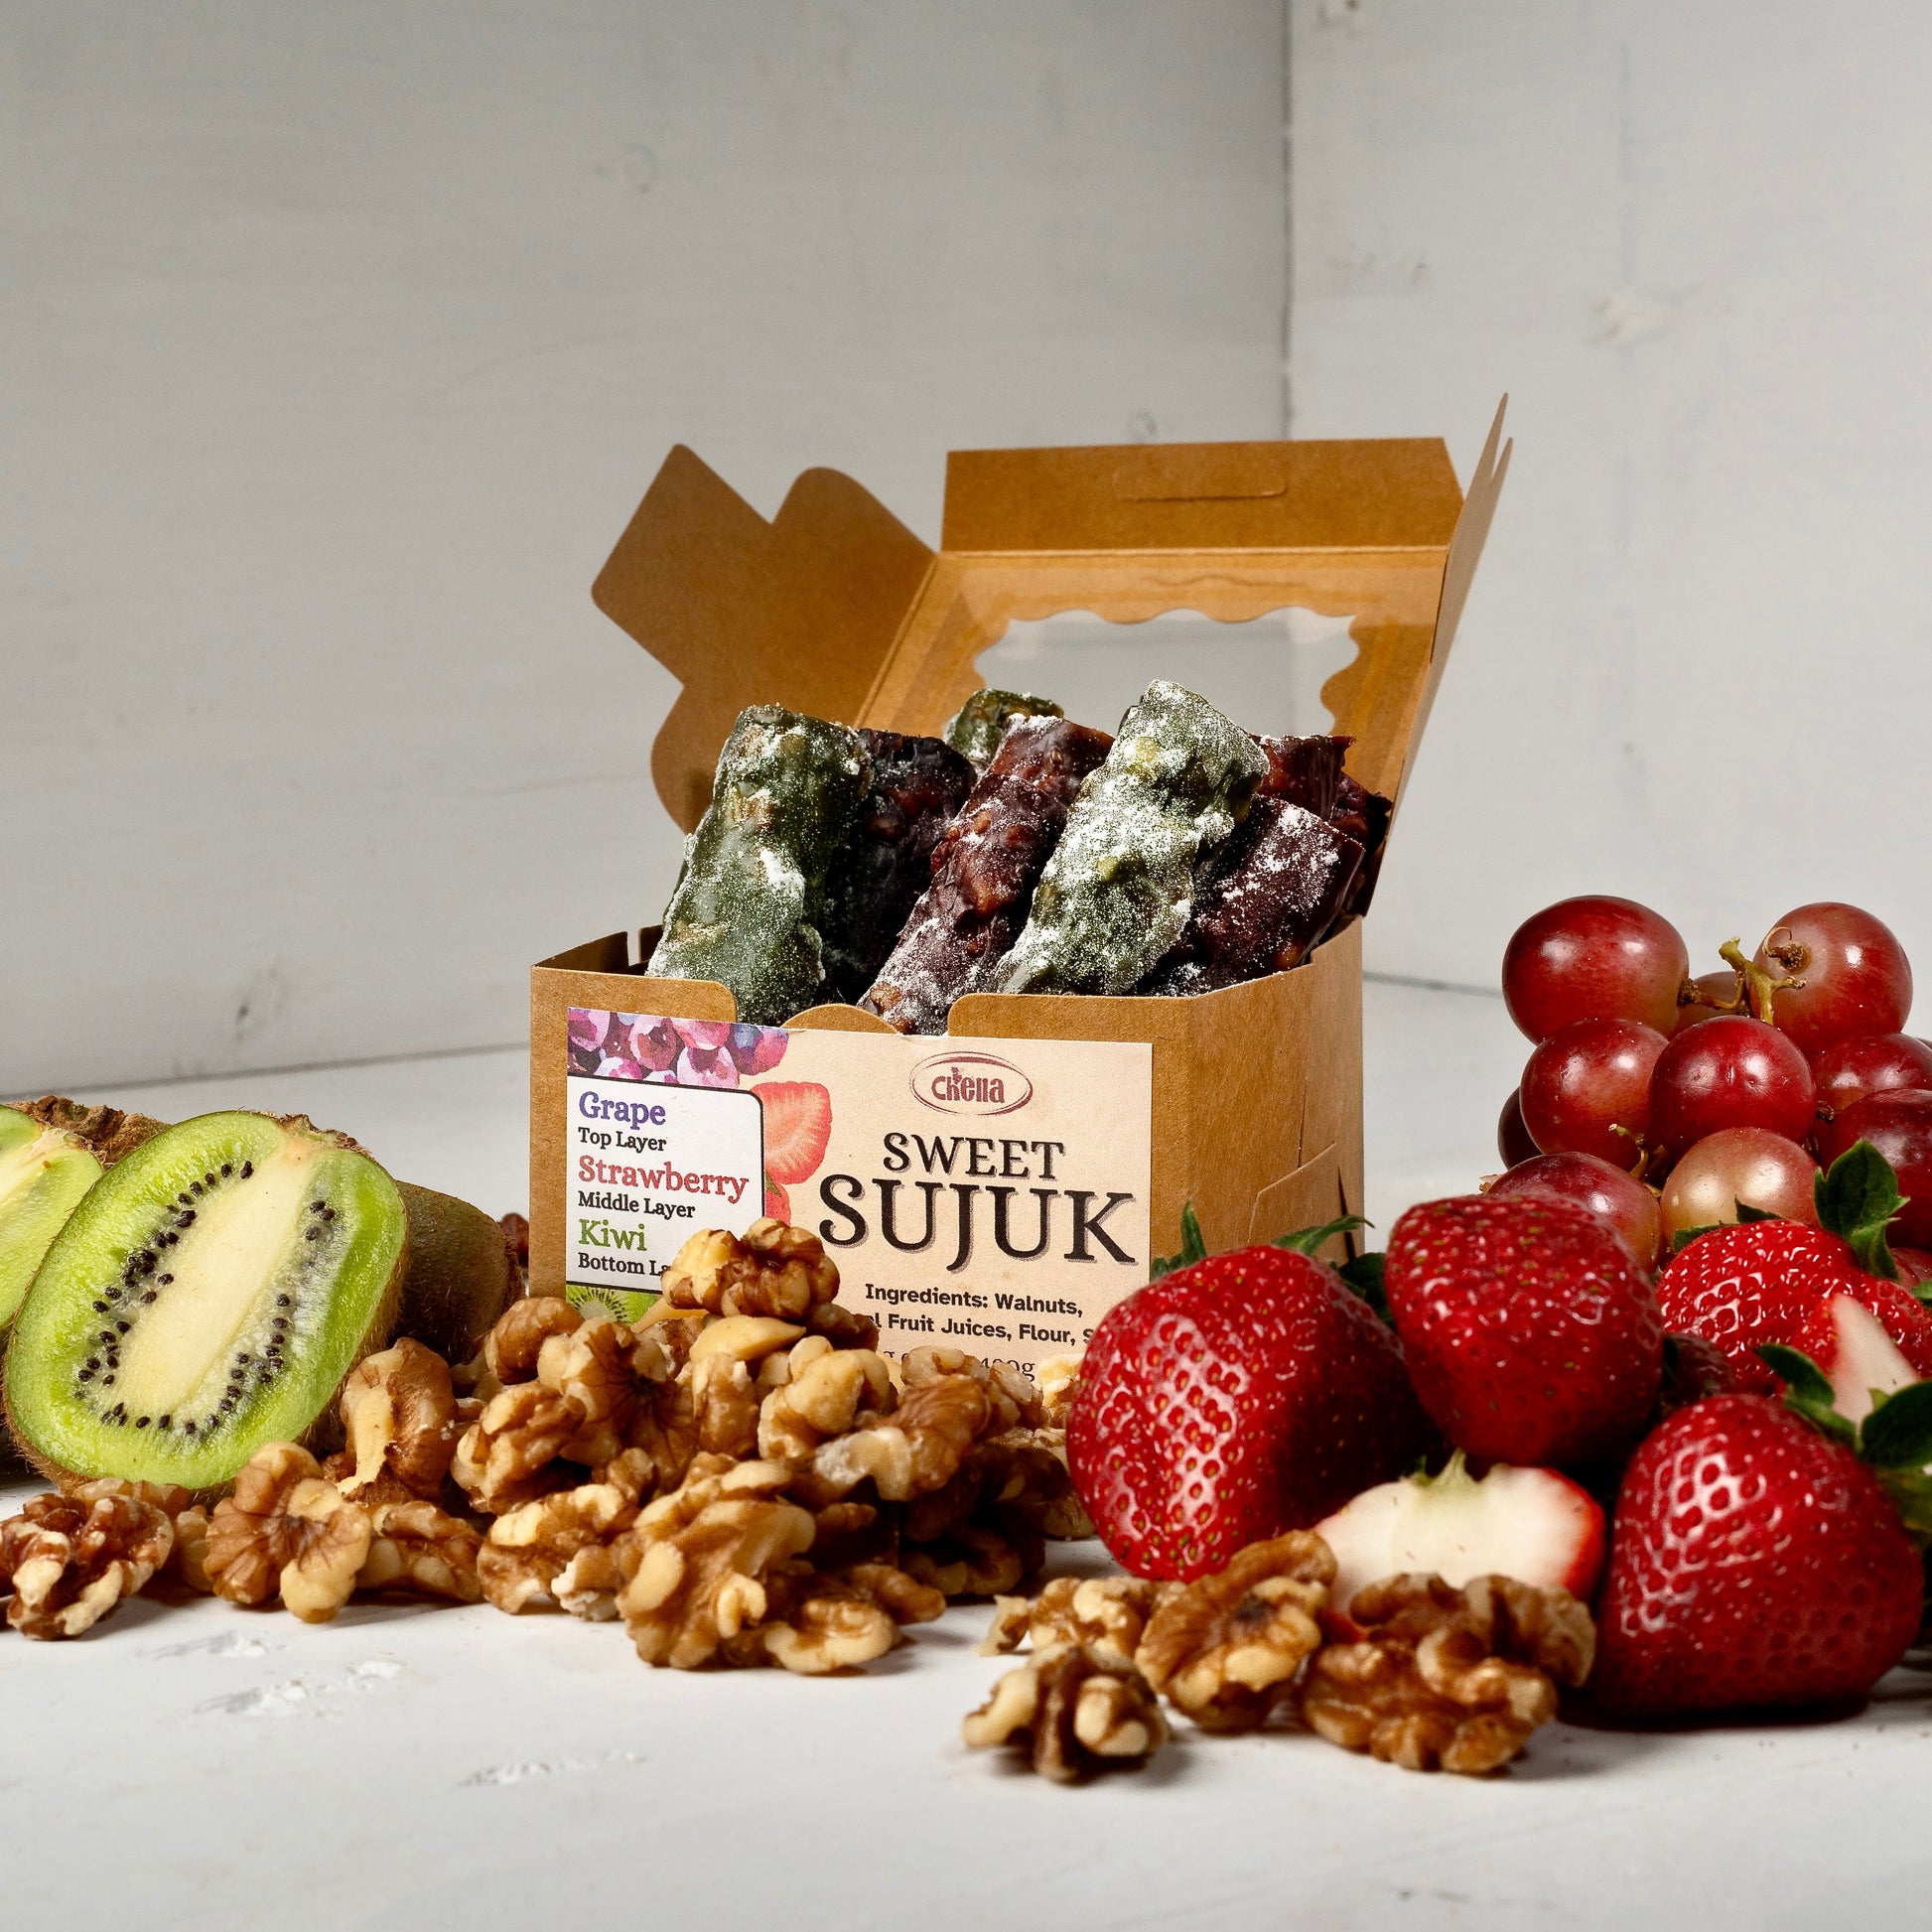 A photo of our Sweet Sujuk in a box with kiwis, walnuts, strawberries and grapes layed out in front of the box, helping to show what flavours we carry.